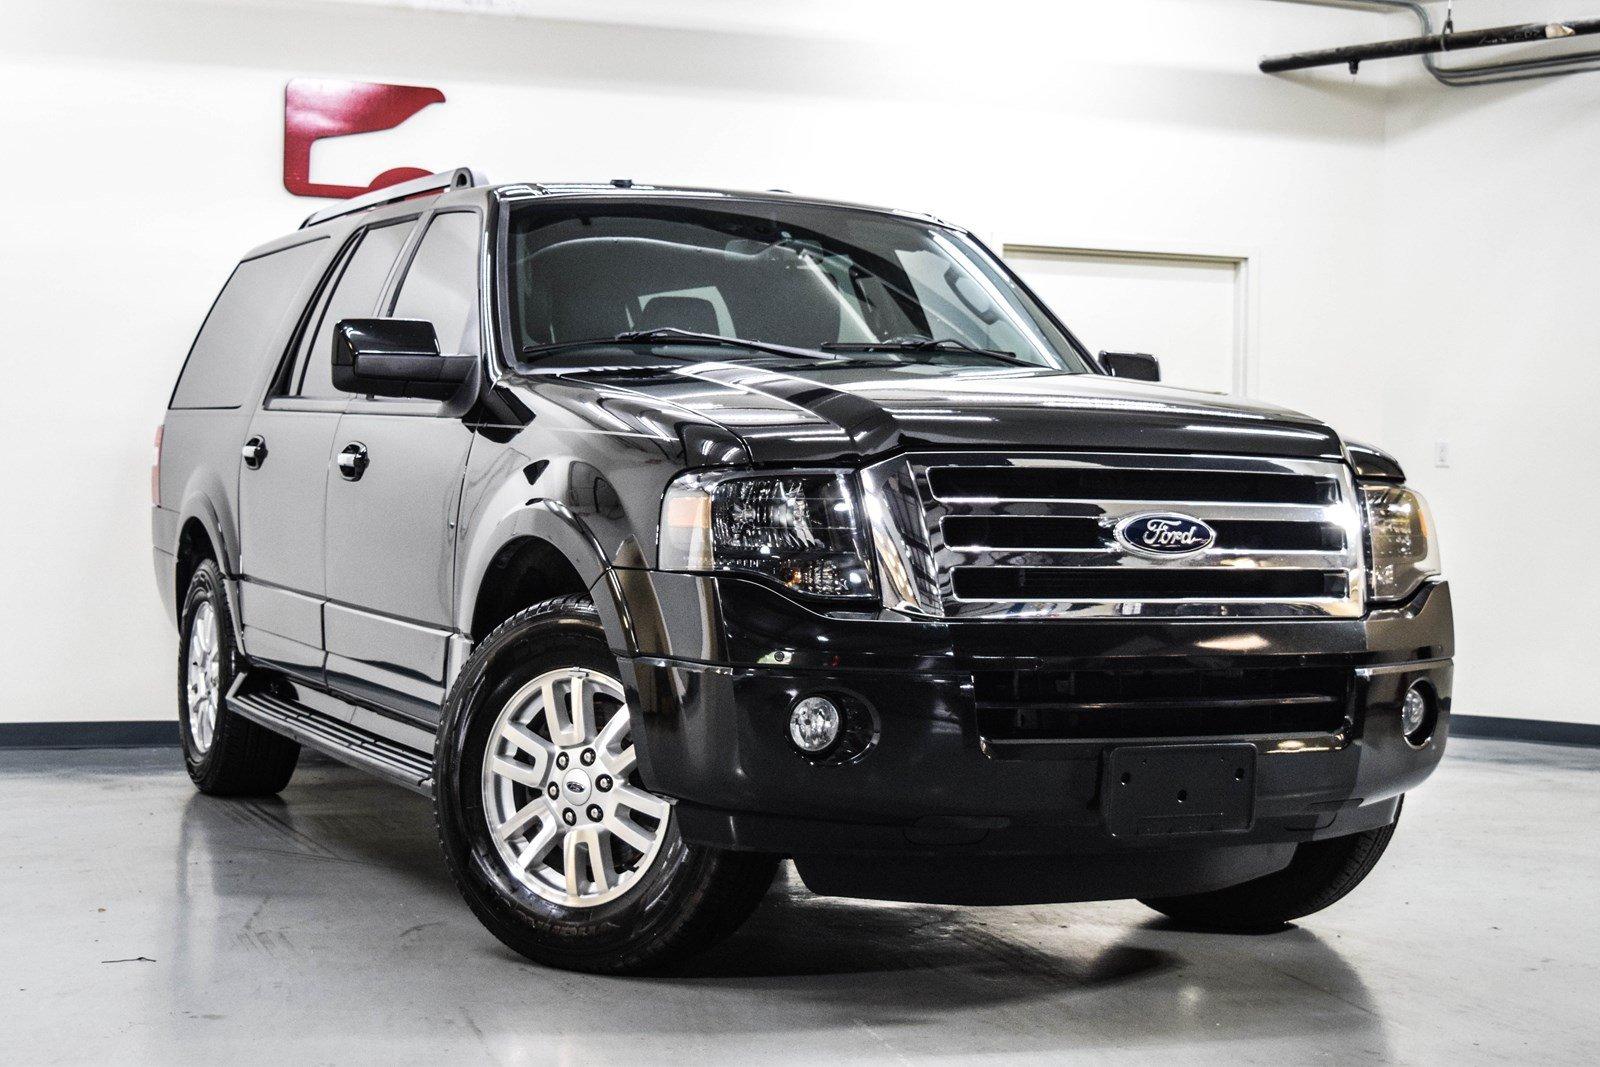 Used 2013 Ford Expedition EL Limited for sale Sold at Gravity Autos Marietta in Marietta GA 30060 2